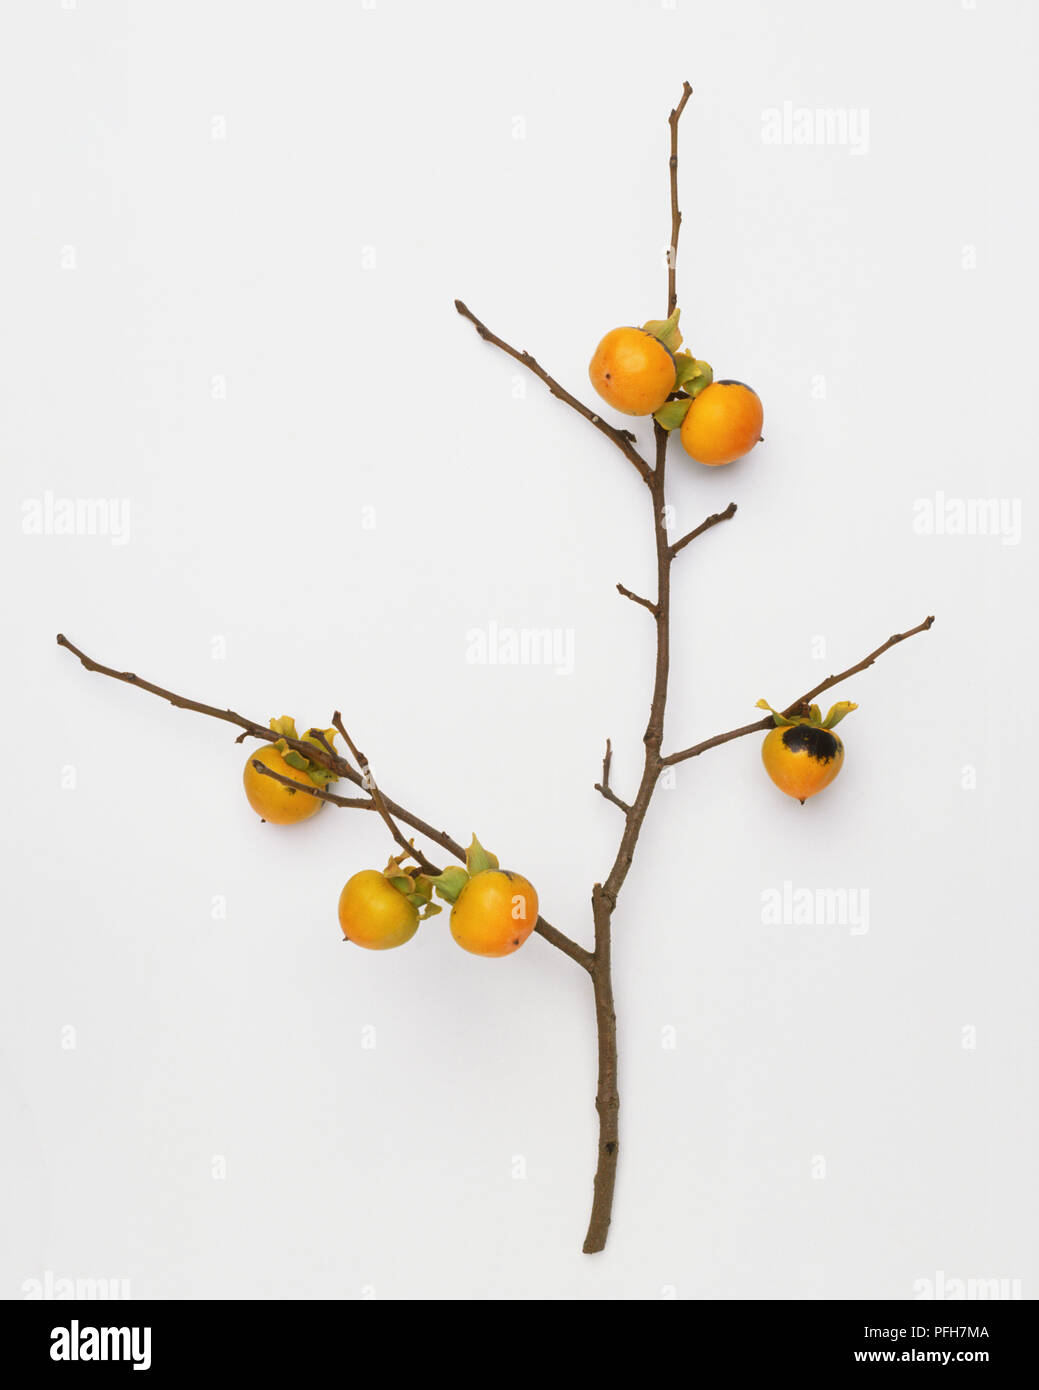 Diospyrus sp., yellow Persimmons on a branchlet Stock Photo